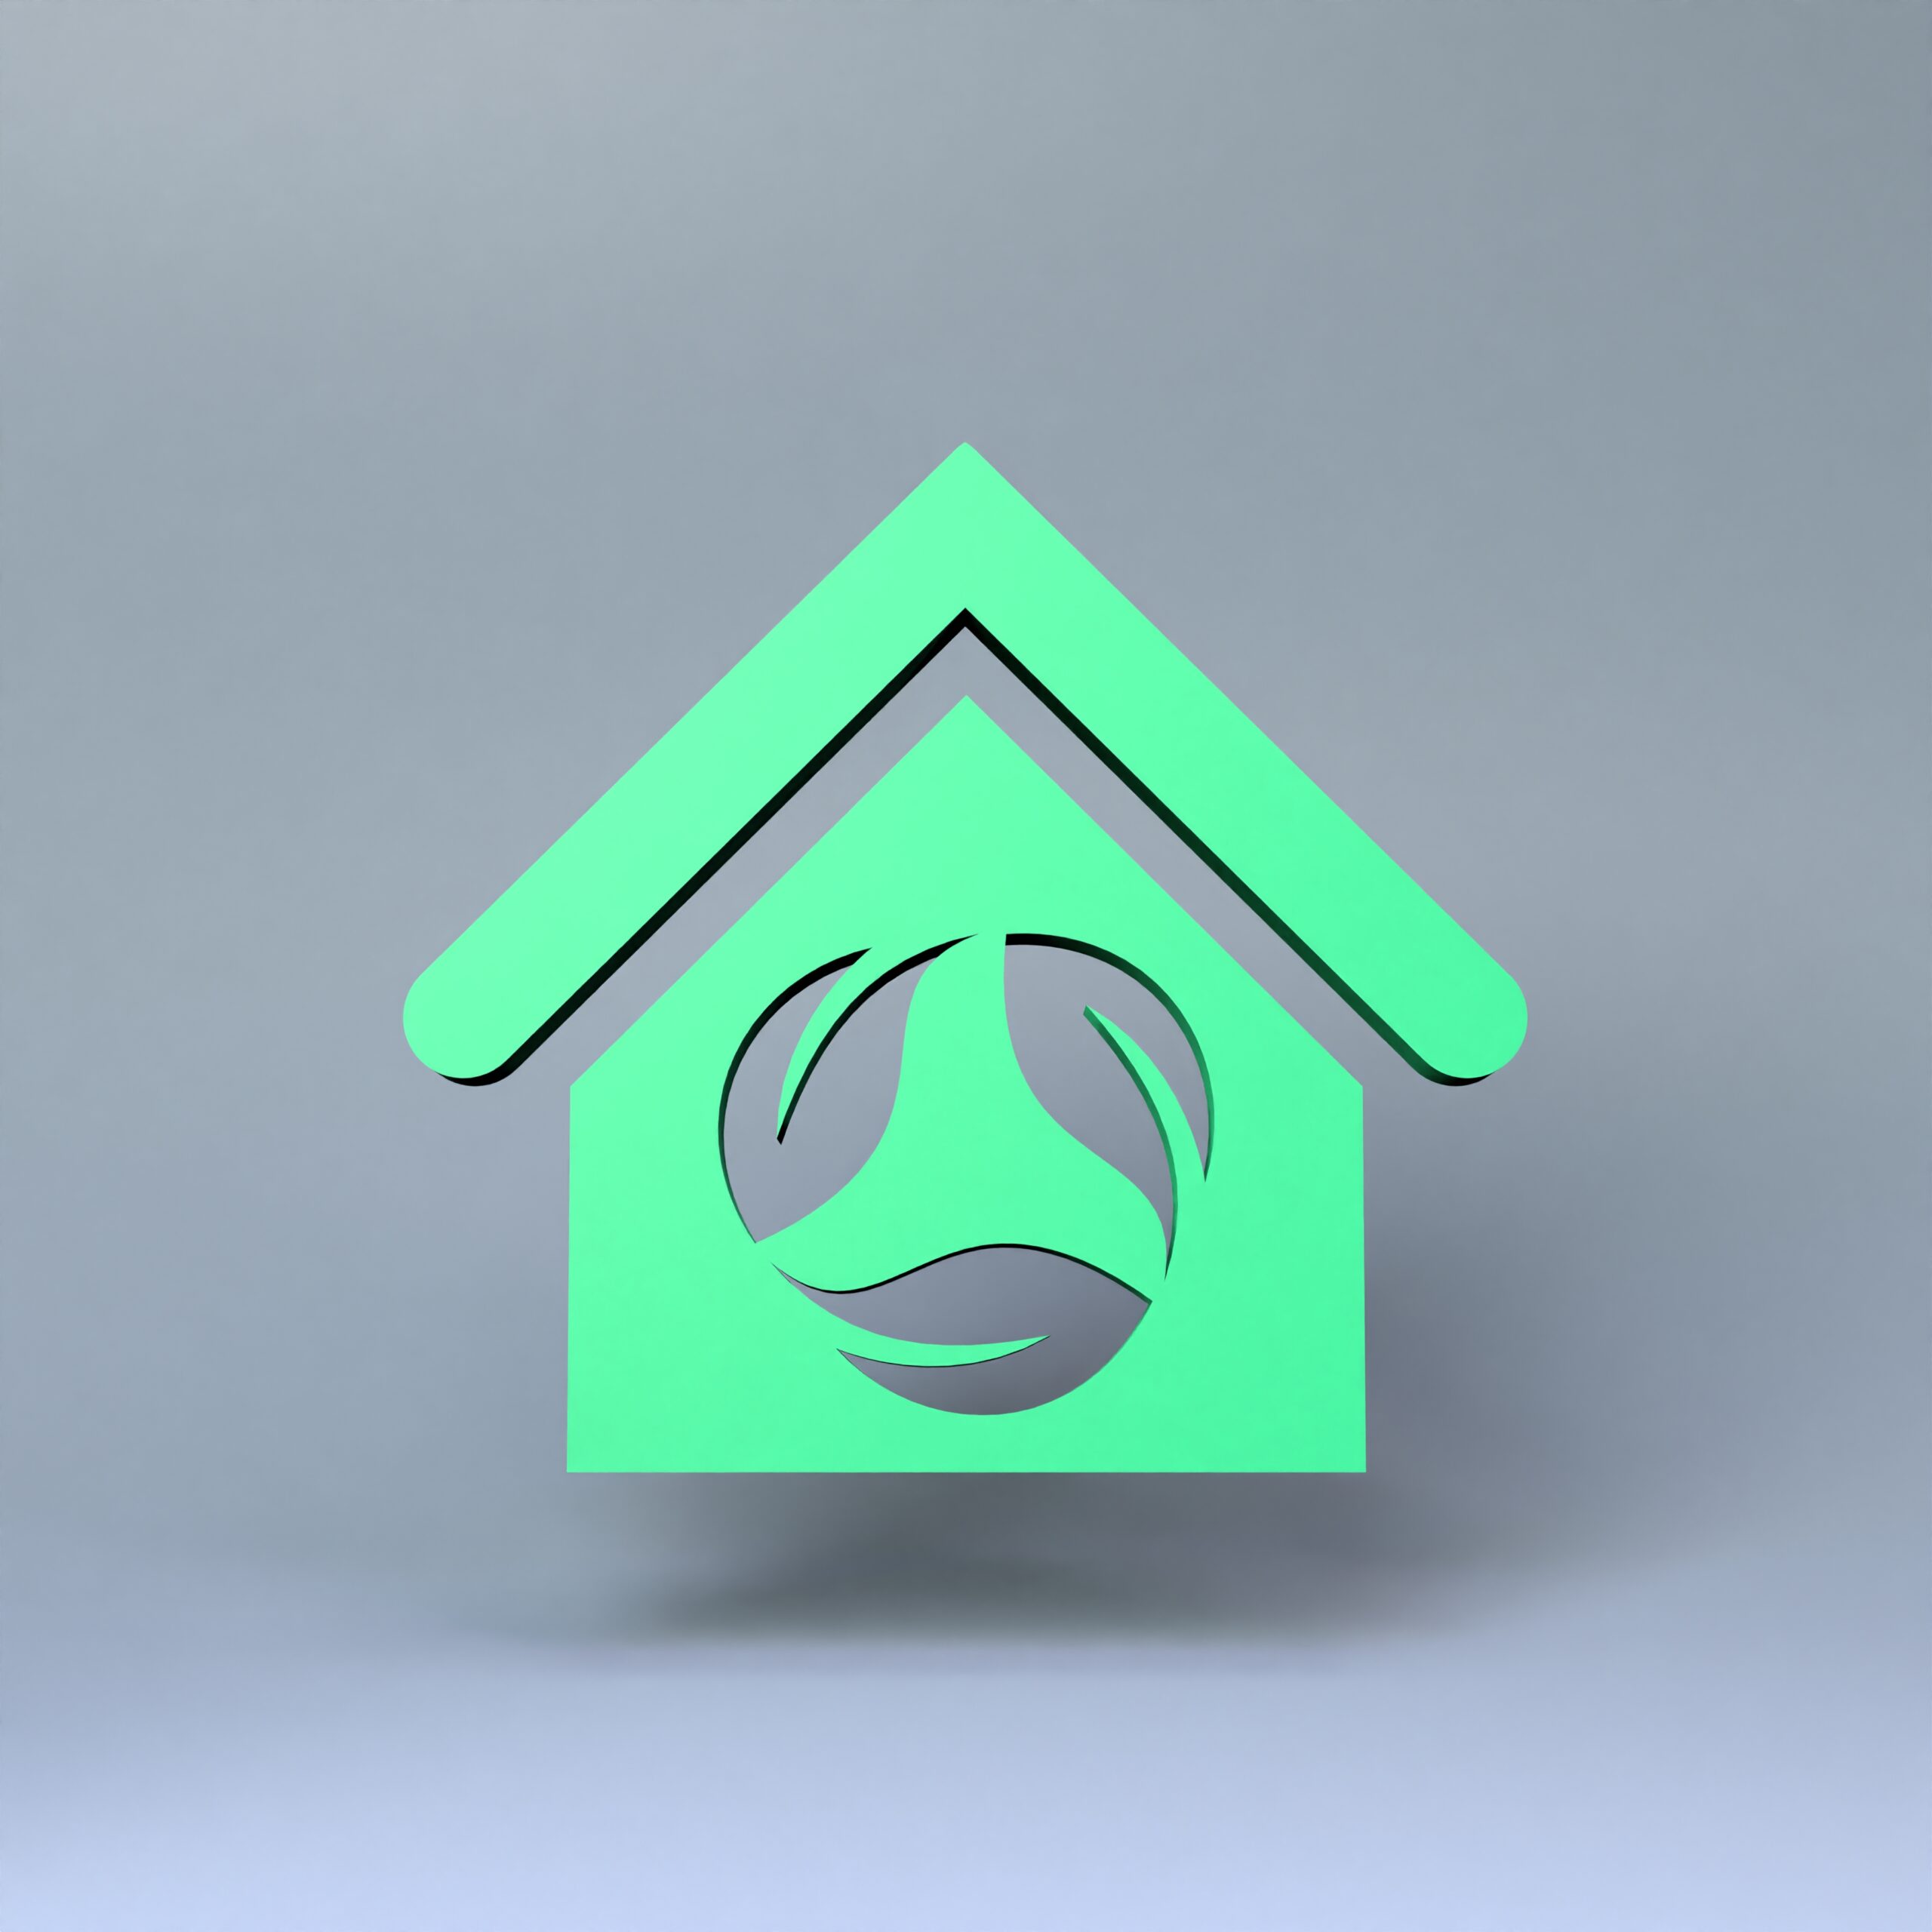 Air Purification Contractor New York - A Green House Logo with a Fresh Air Logo In It